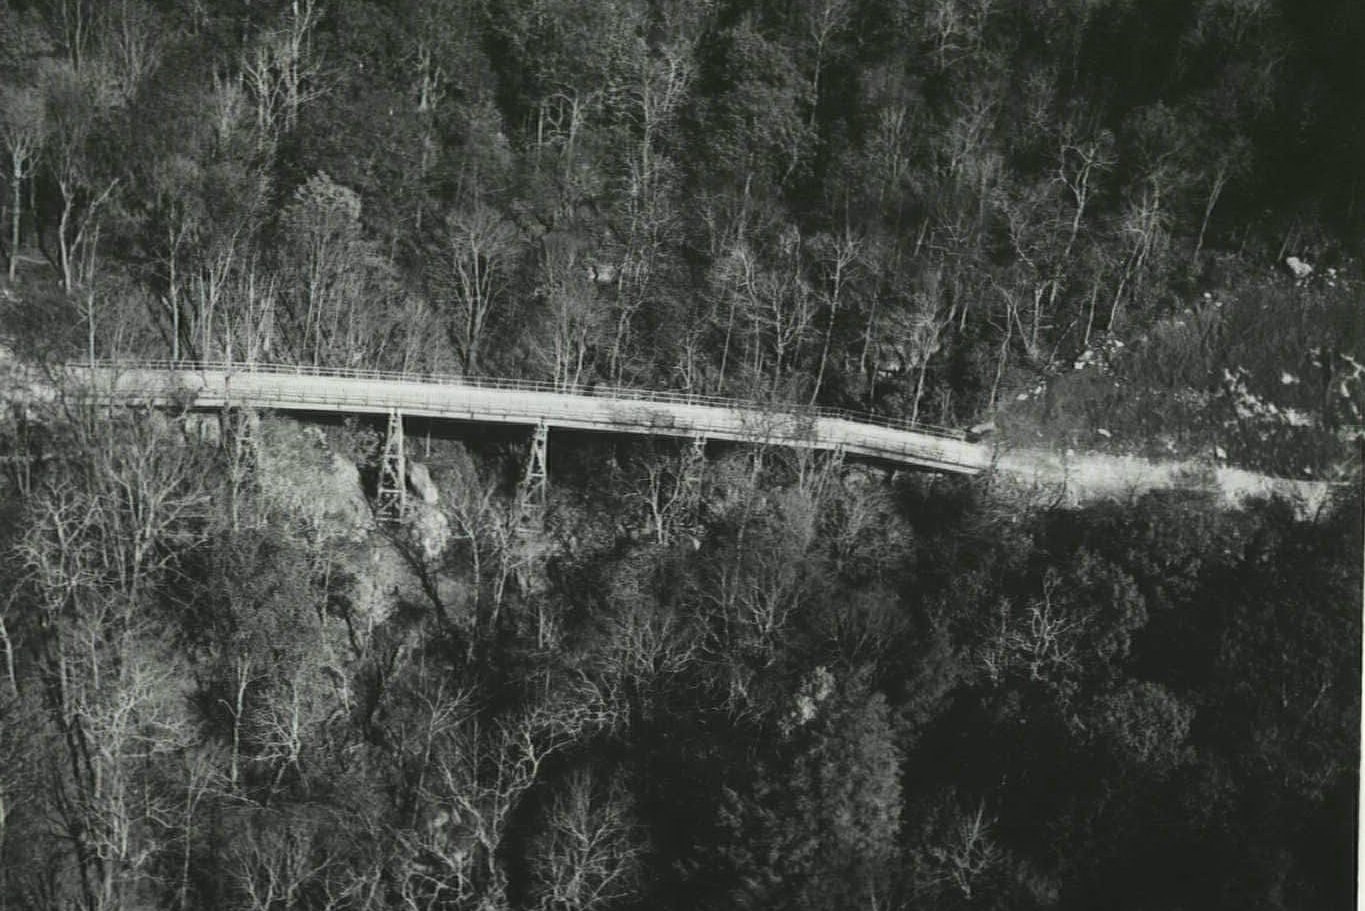 What is the Blue Ridge Parkway viaduct?